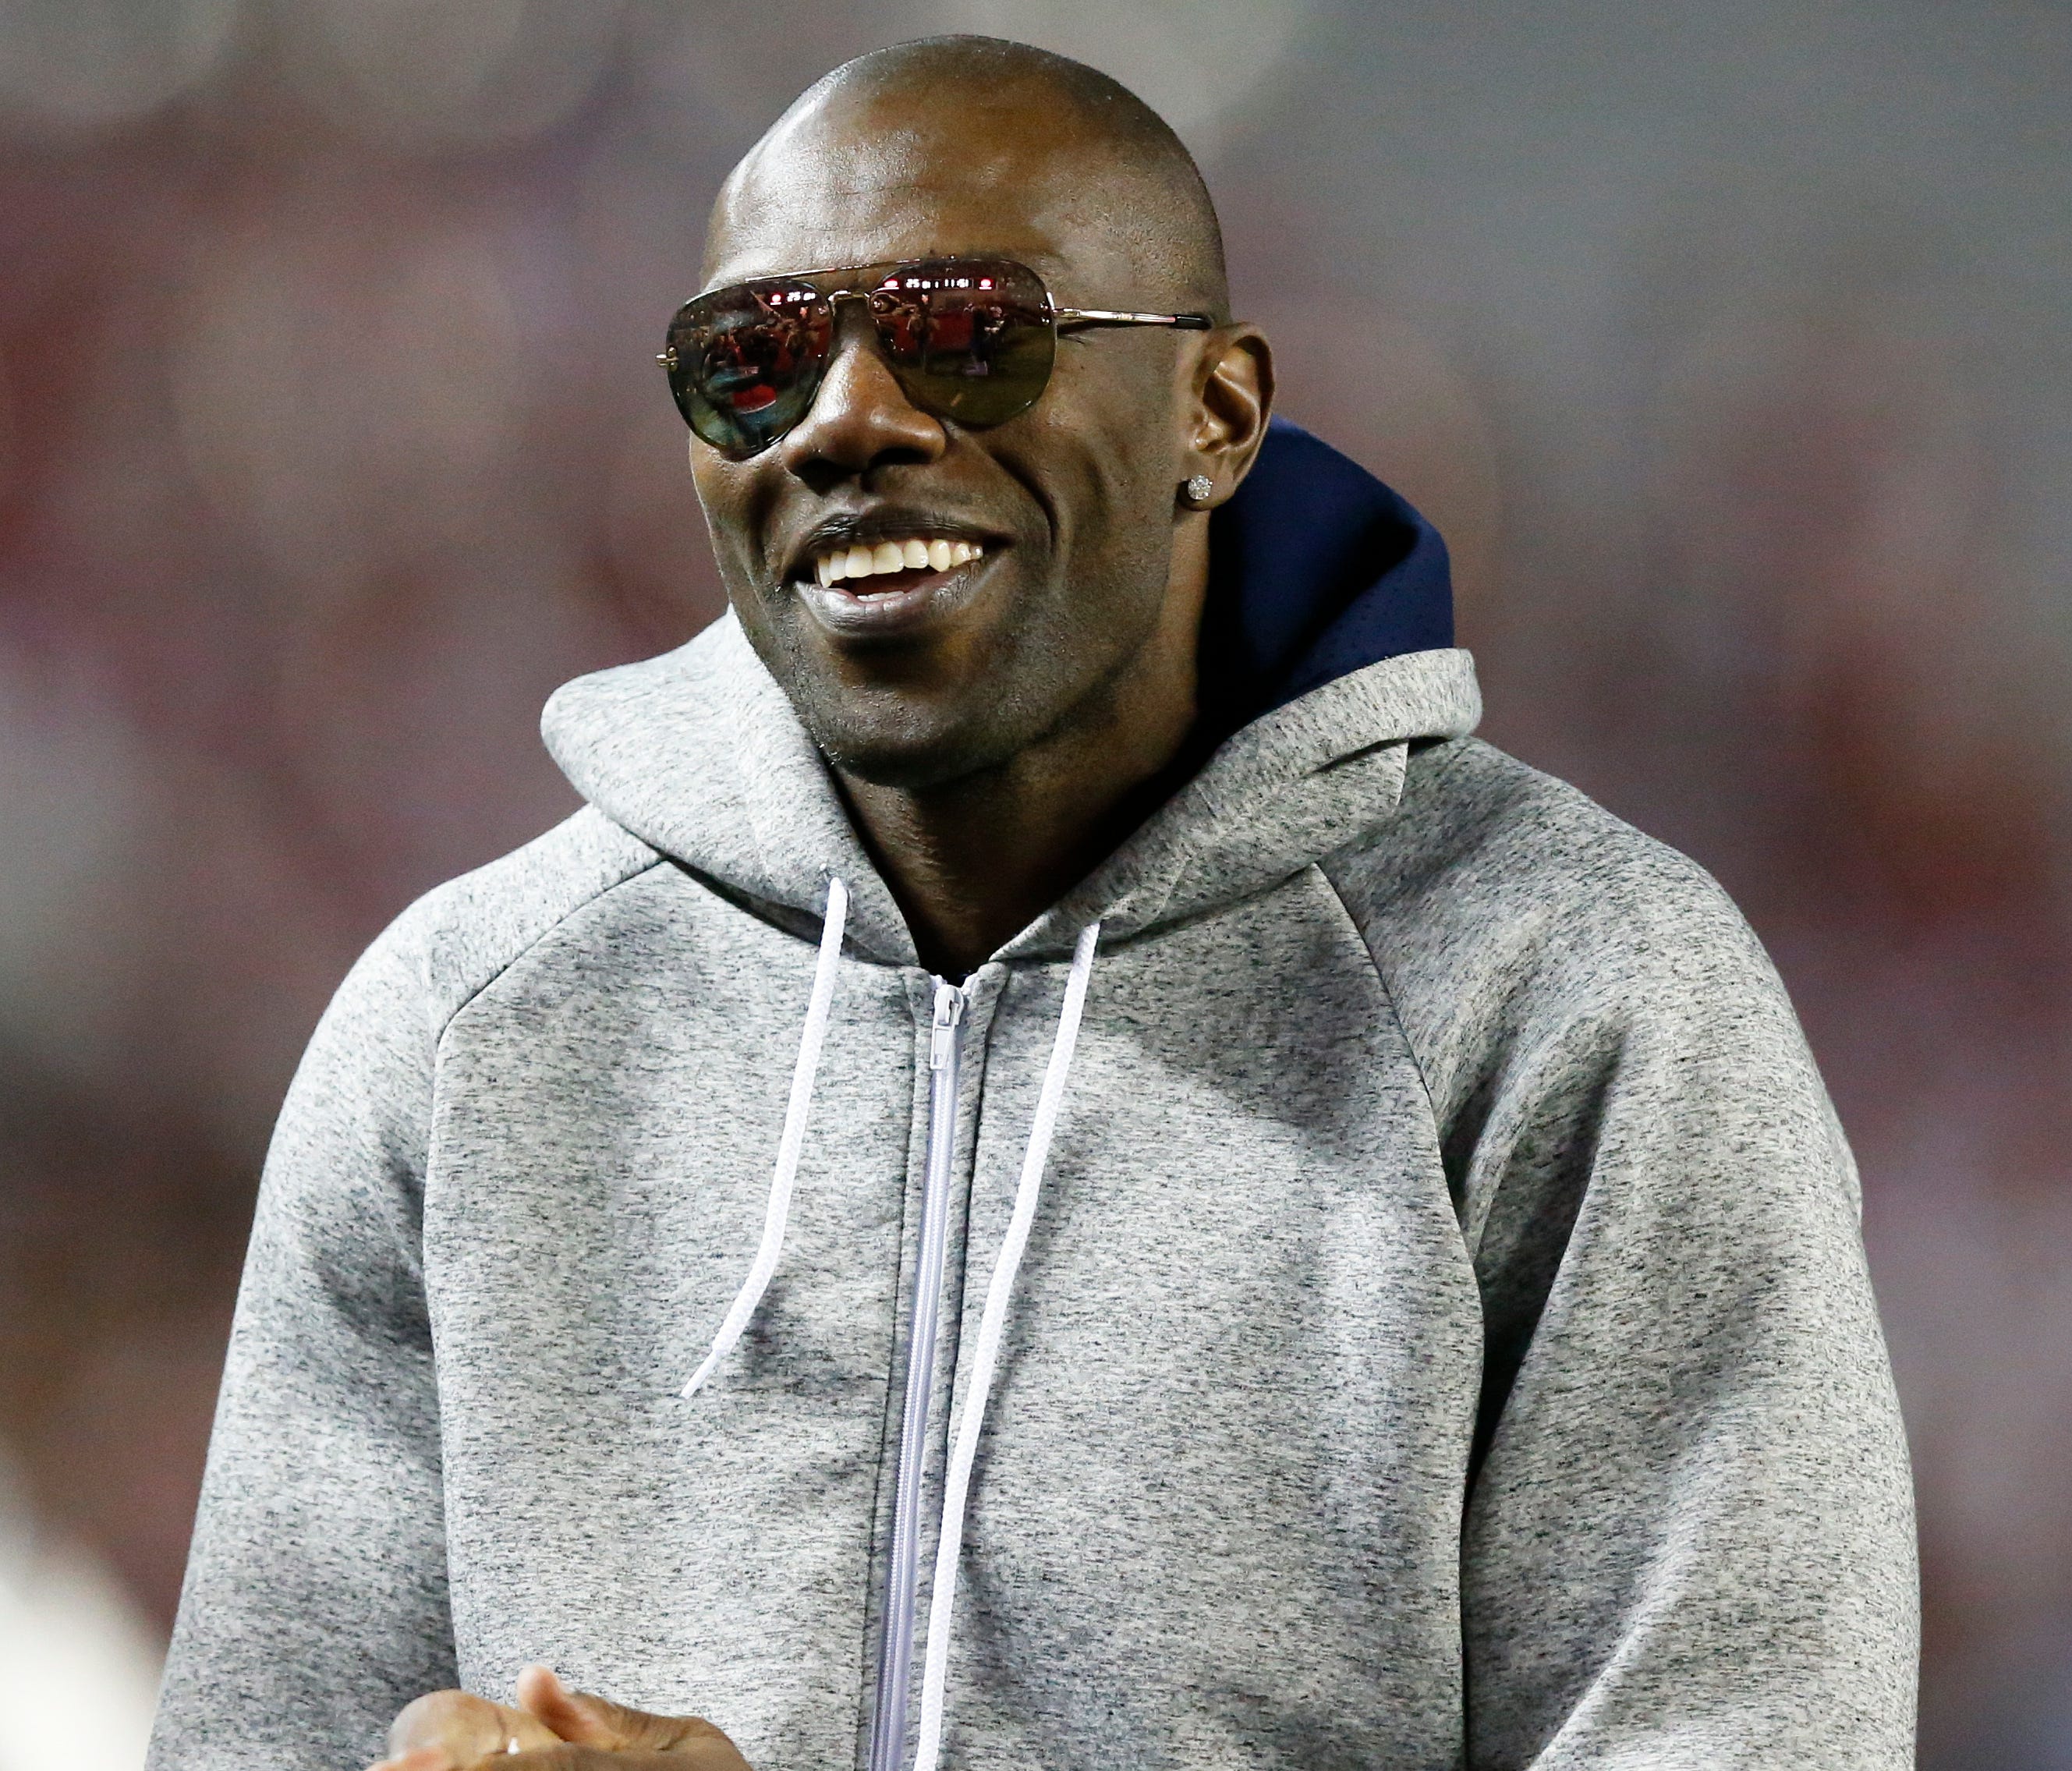 FILE - In this Nov. 19, 2016, file photo, former NFL wide receiver and Chattanooga alum Terrell Owens walks the sidelines during the second half of an NCAA college football game between Alabama and Chattanooga, in Tuscaloosa, Ala. Terrell Owens says 